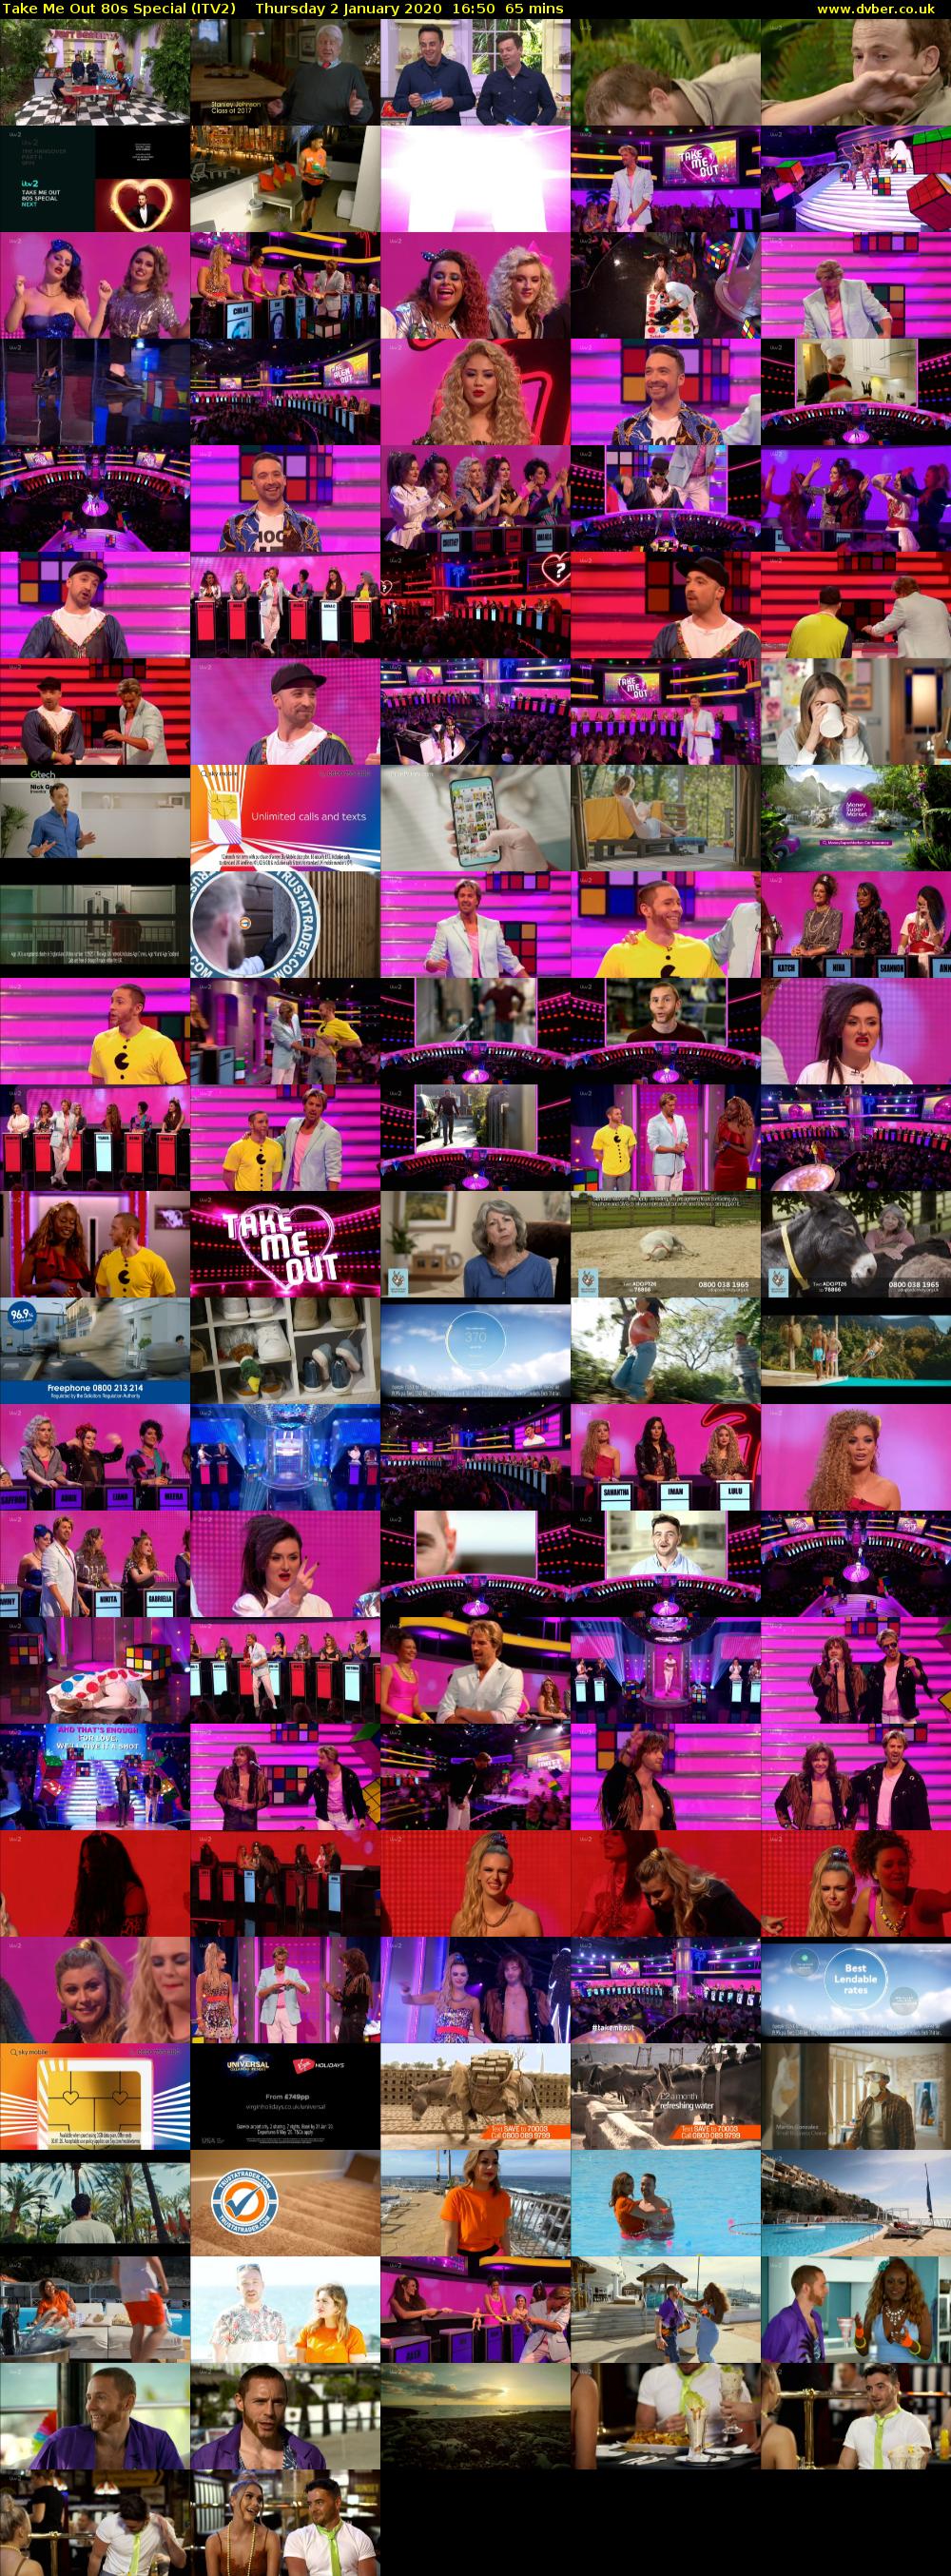 Take Me Out 80s Special (ITV2) Thursday 2 January 2020 16:50 - 17:55